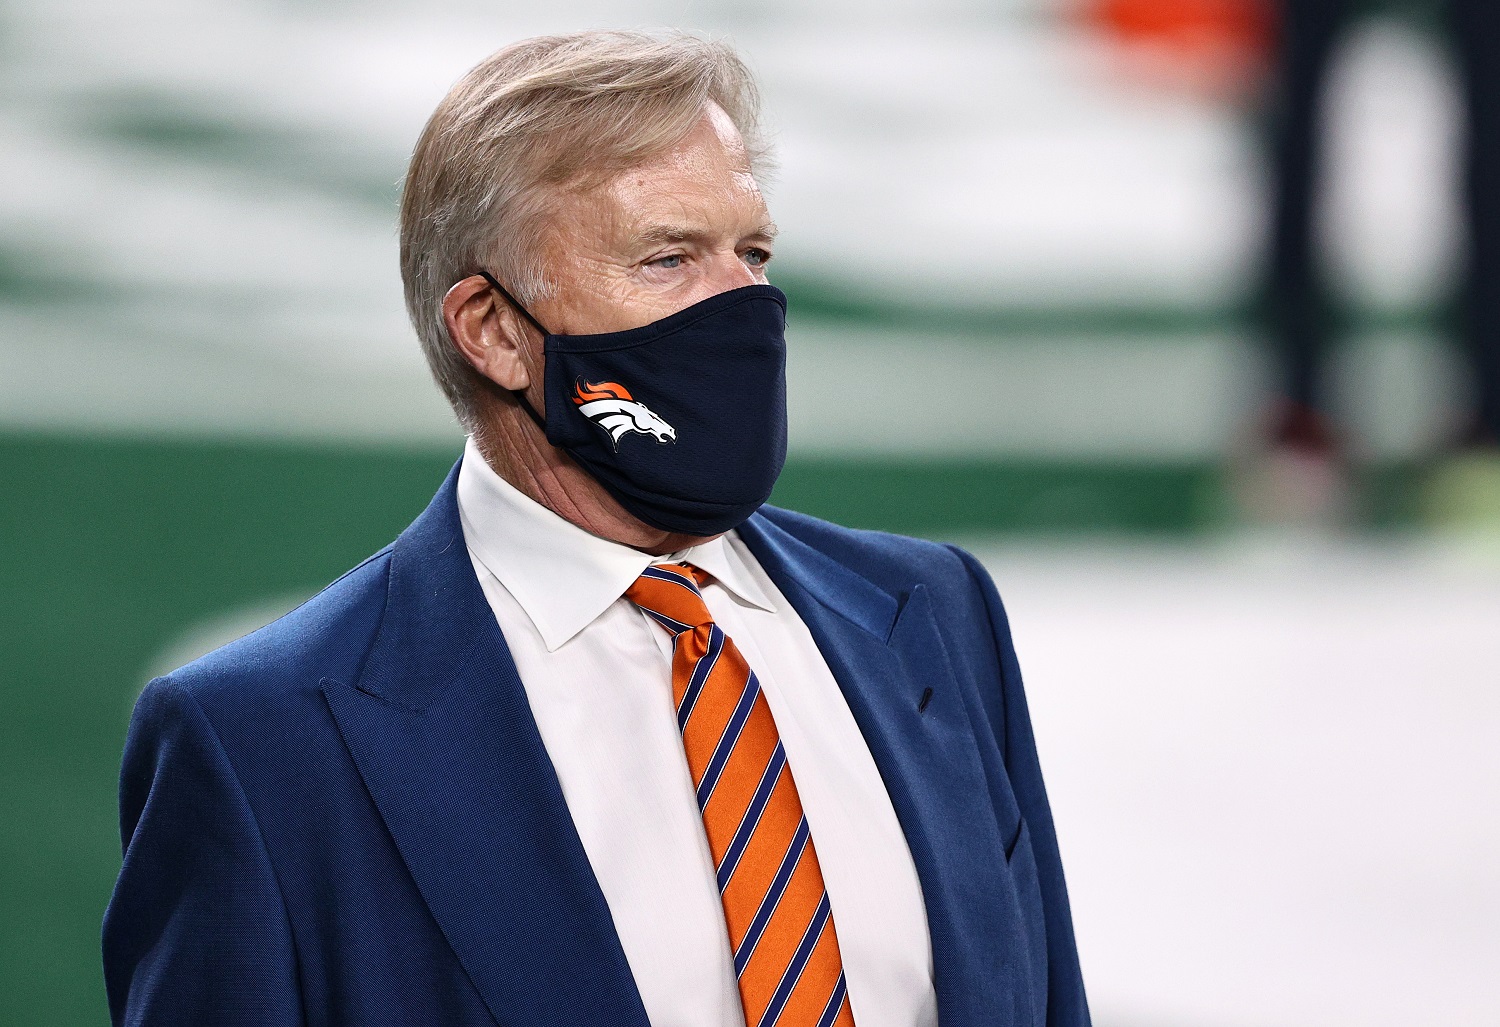 Denver Broncos executive John Elway looks on before the game against the New York Jets at MetLife Stadium on Oct. 1, 2020.